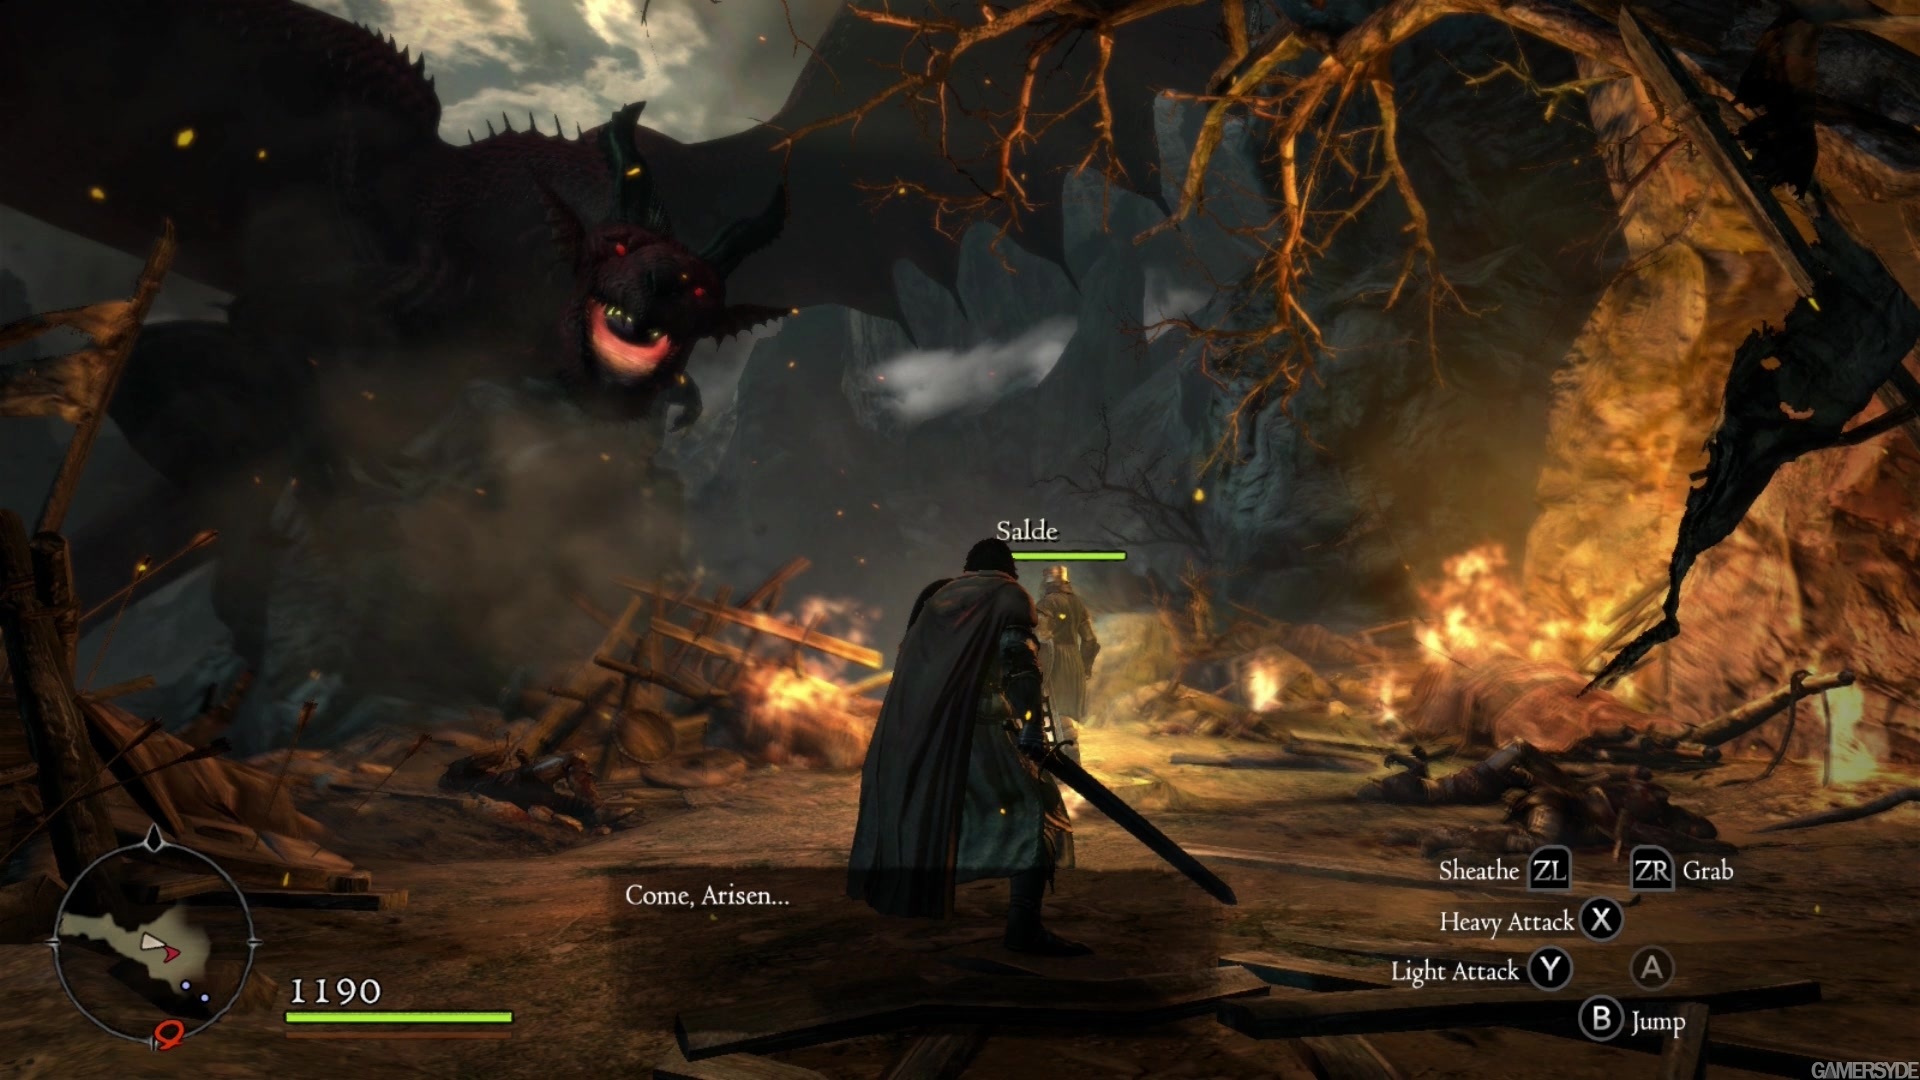 dragon dogma how to use torrent files on your pc